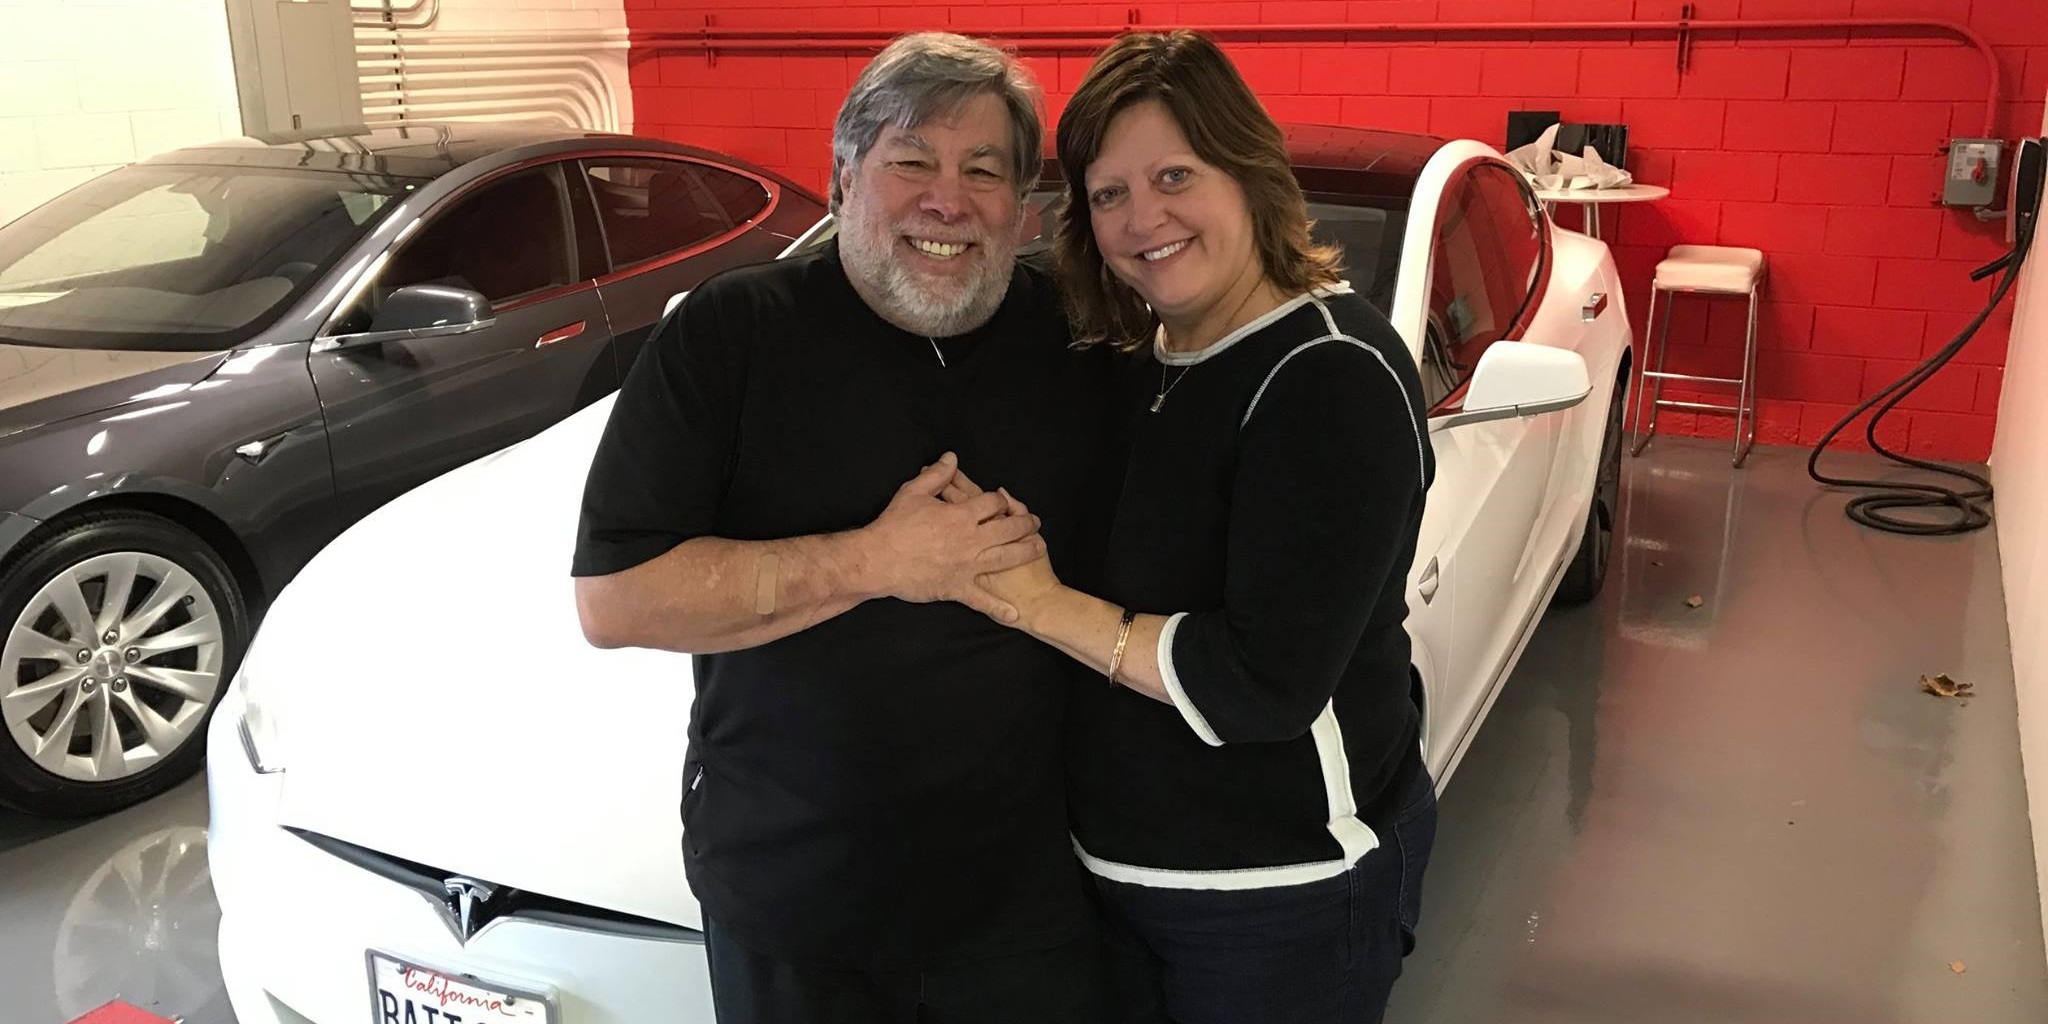 Get a Tesla if you want to learn about AI trying to kill you, says Apple cofounder Steve Wozniak